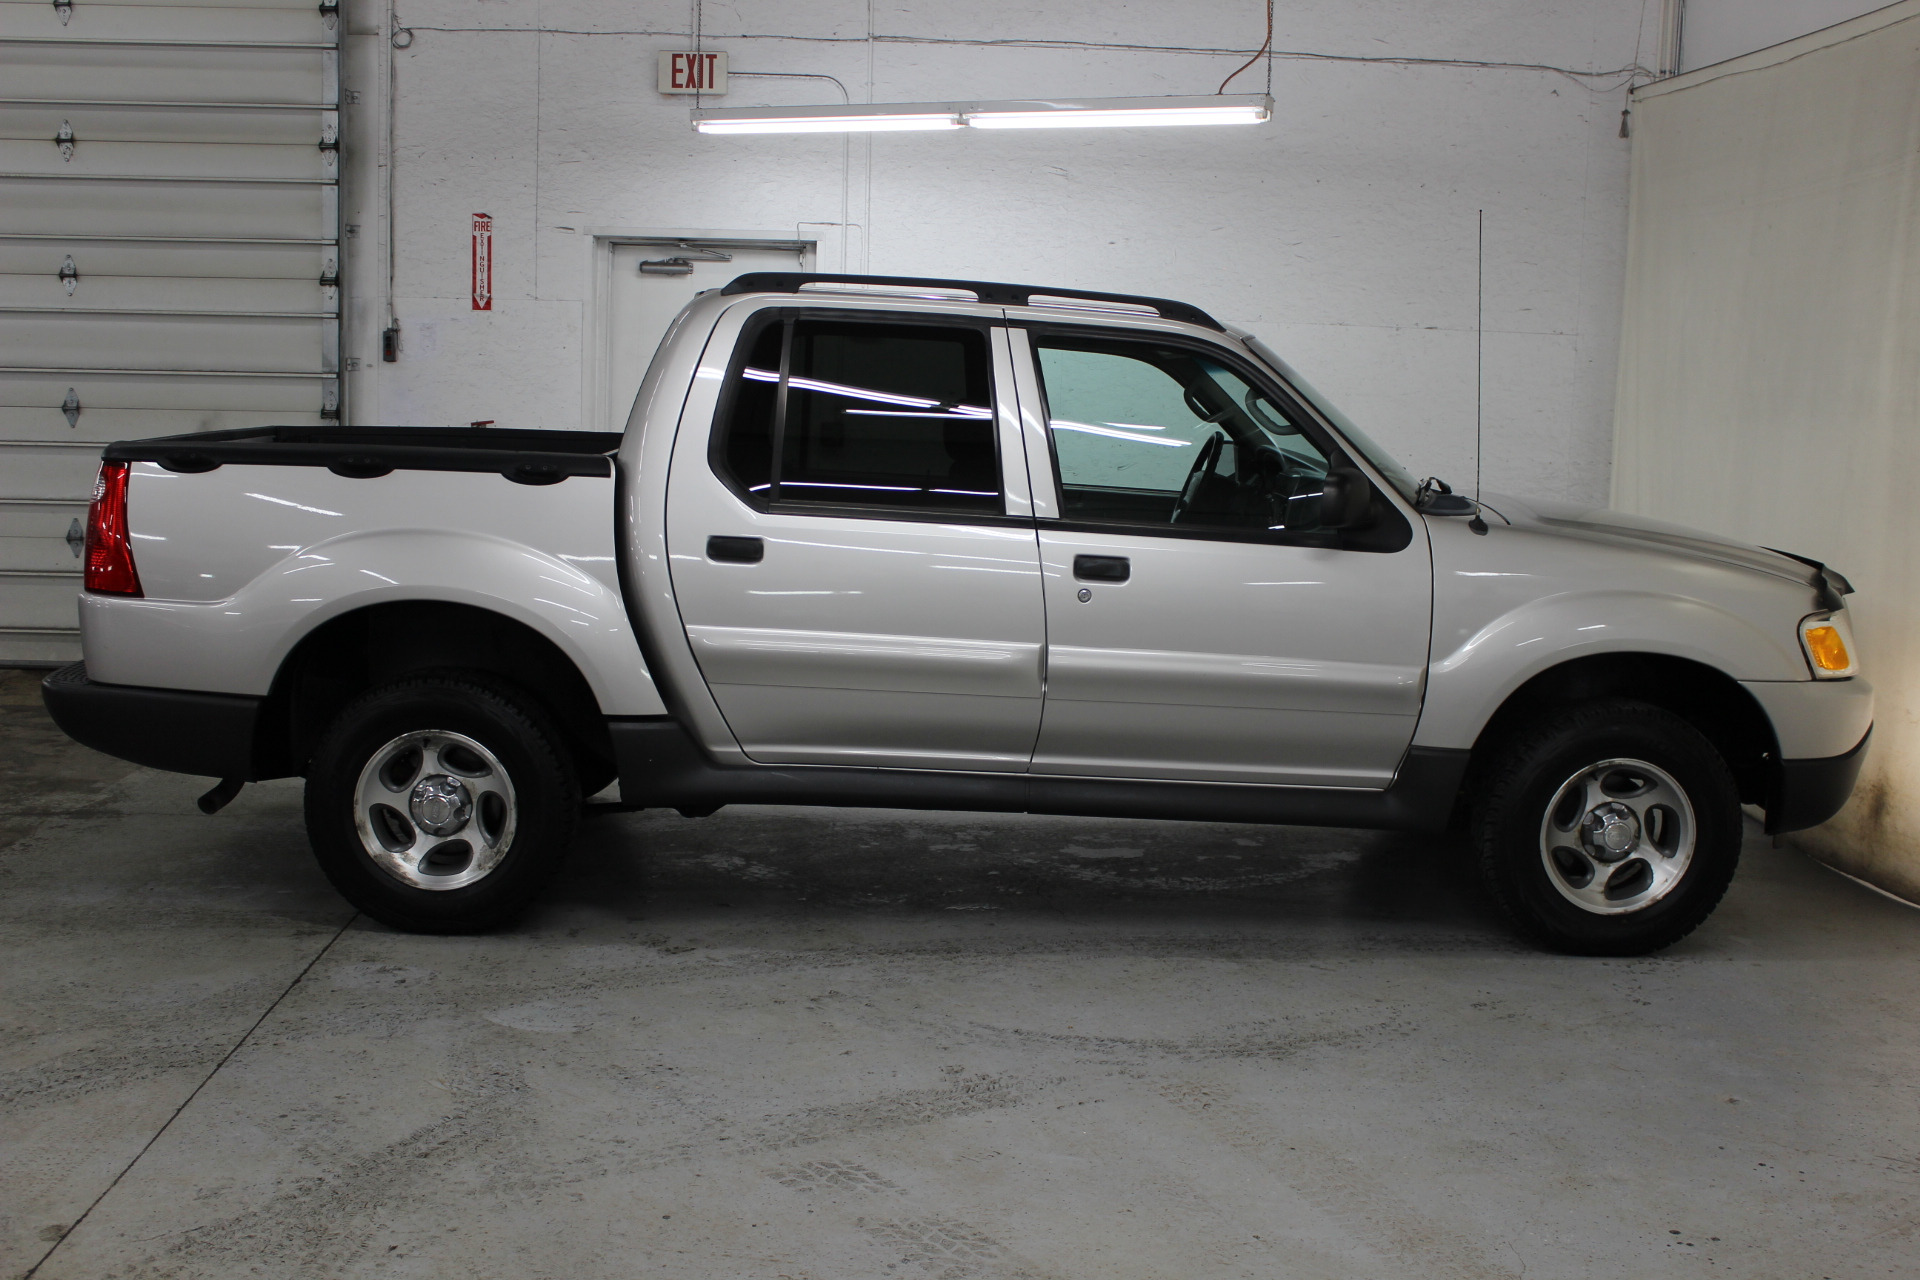 2004 Ford Explorer Sport Trac XLS - Biscayne Auto Sales | Pre-owned  Dealership | Ontario, NY